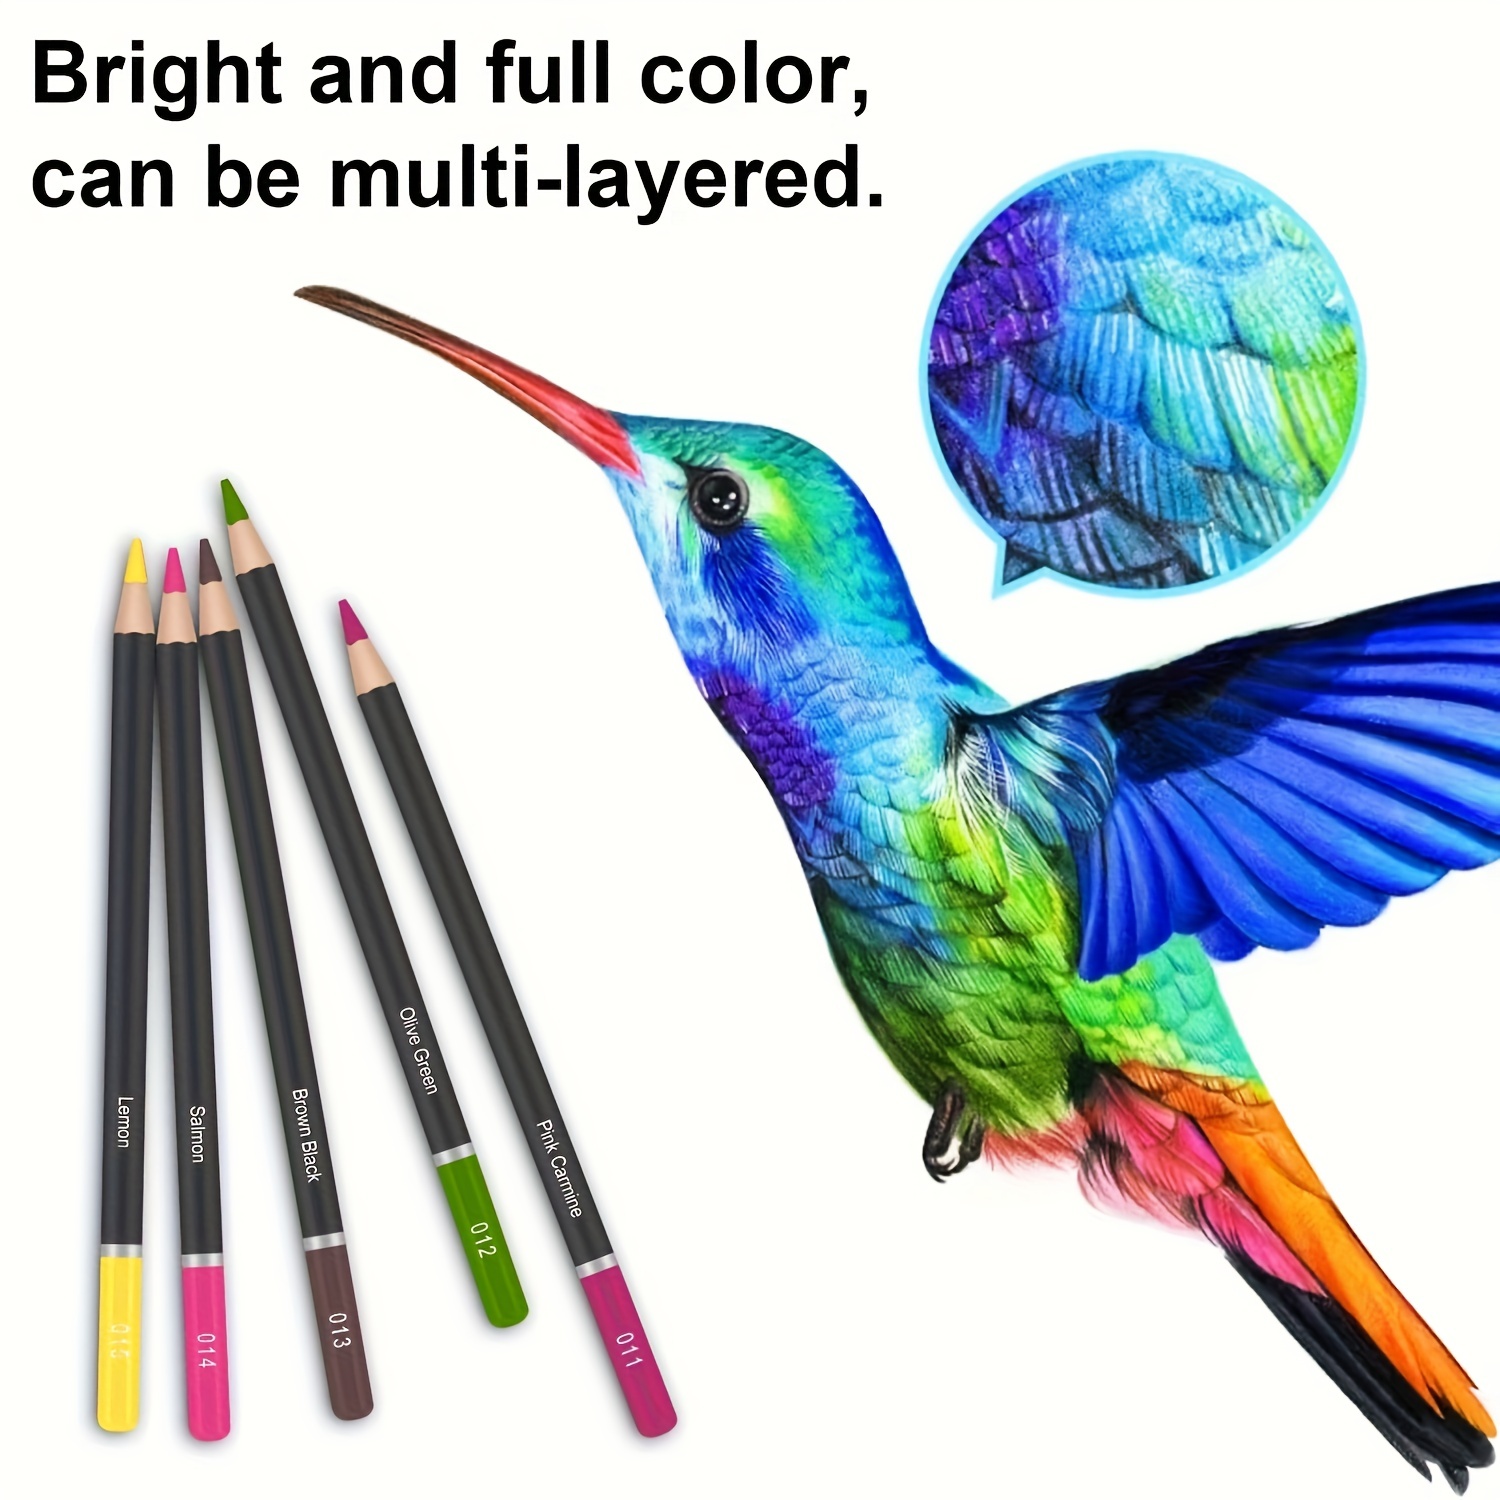 72 Pcs Art Supplies Art Set,Drawing Supply for Artist Adult Teen Kids,Drawing  Pencils Kit,Sketching Set Include Charcoal & Colored Pencil,Sketchbook,Coloring  Book in Travel Case 